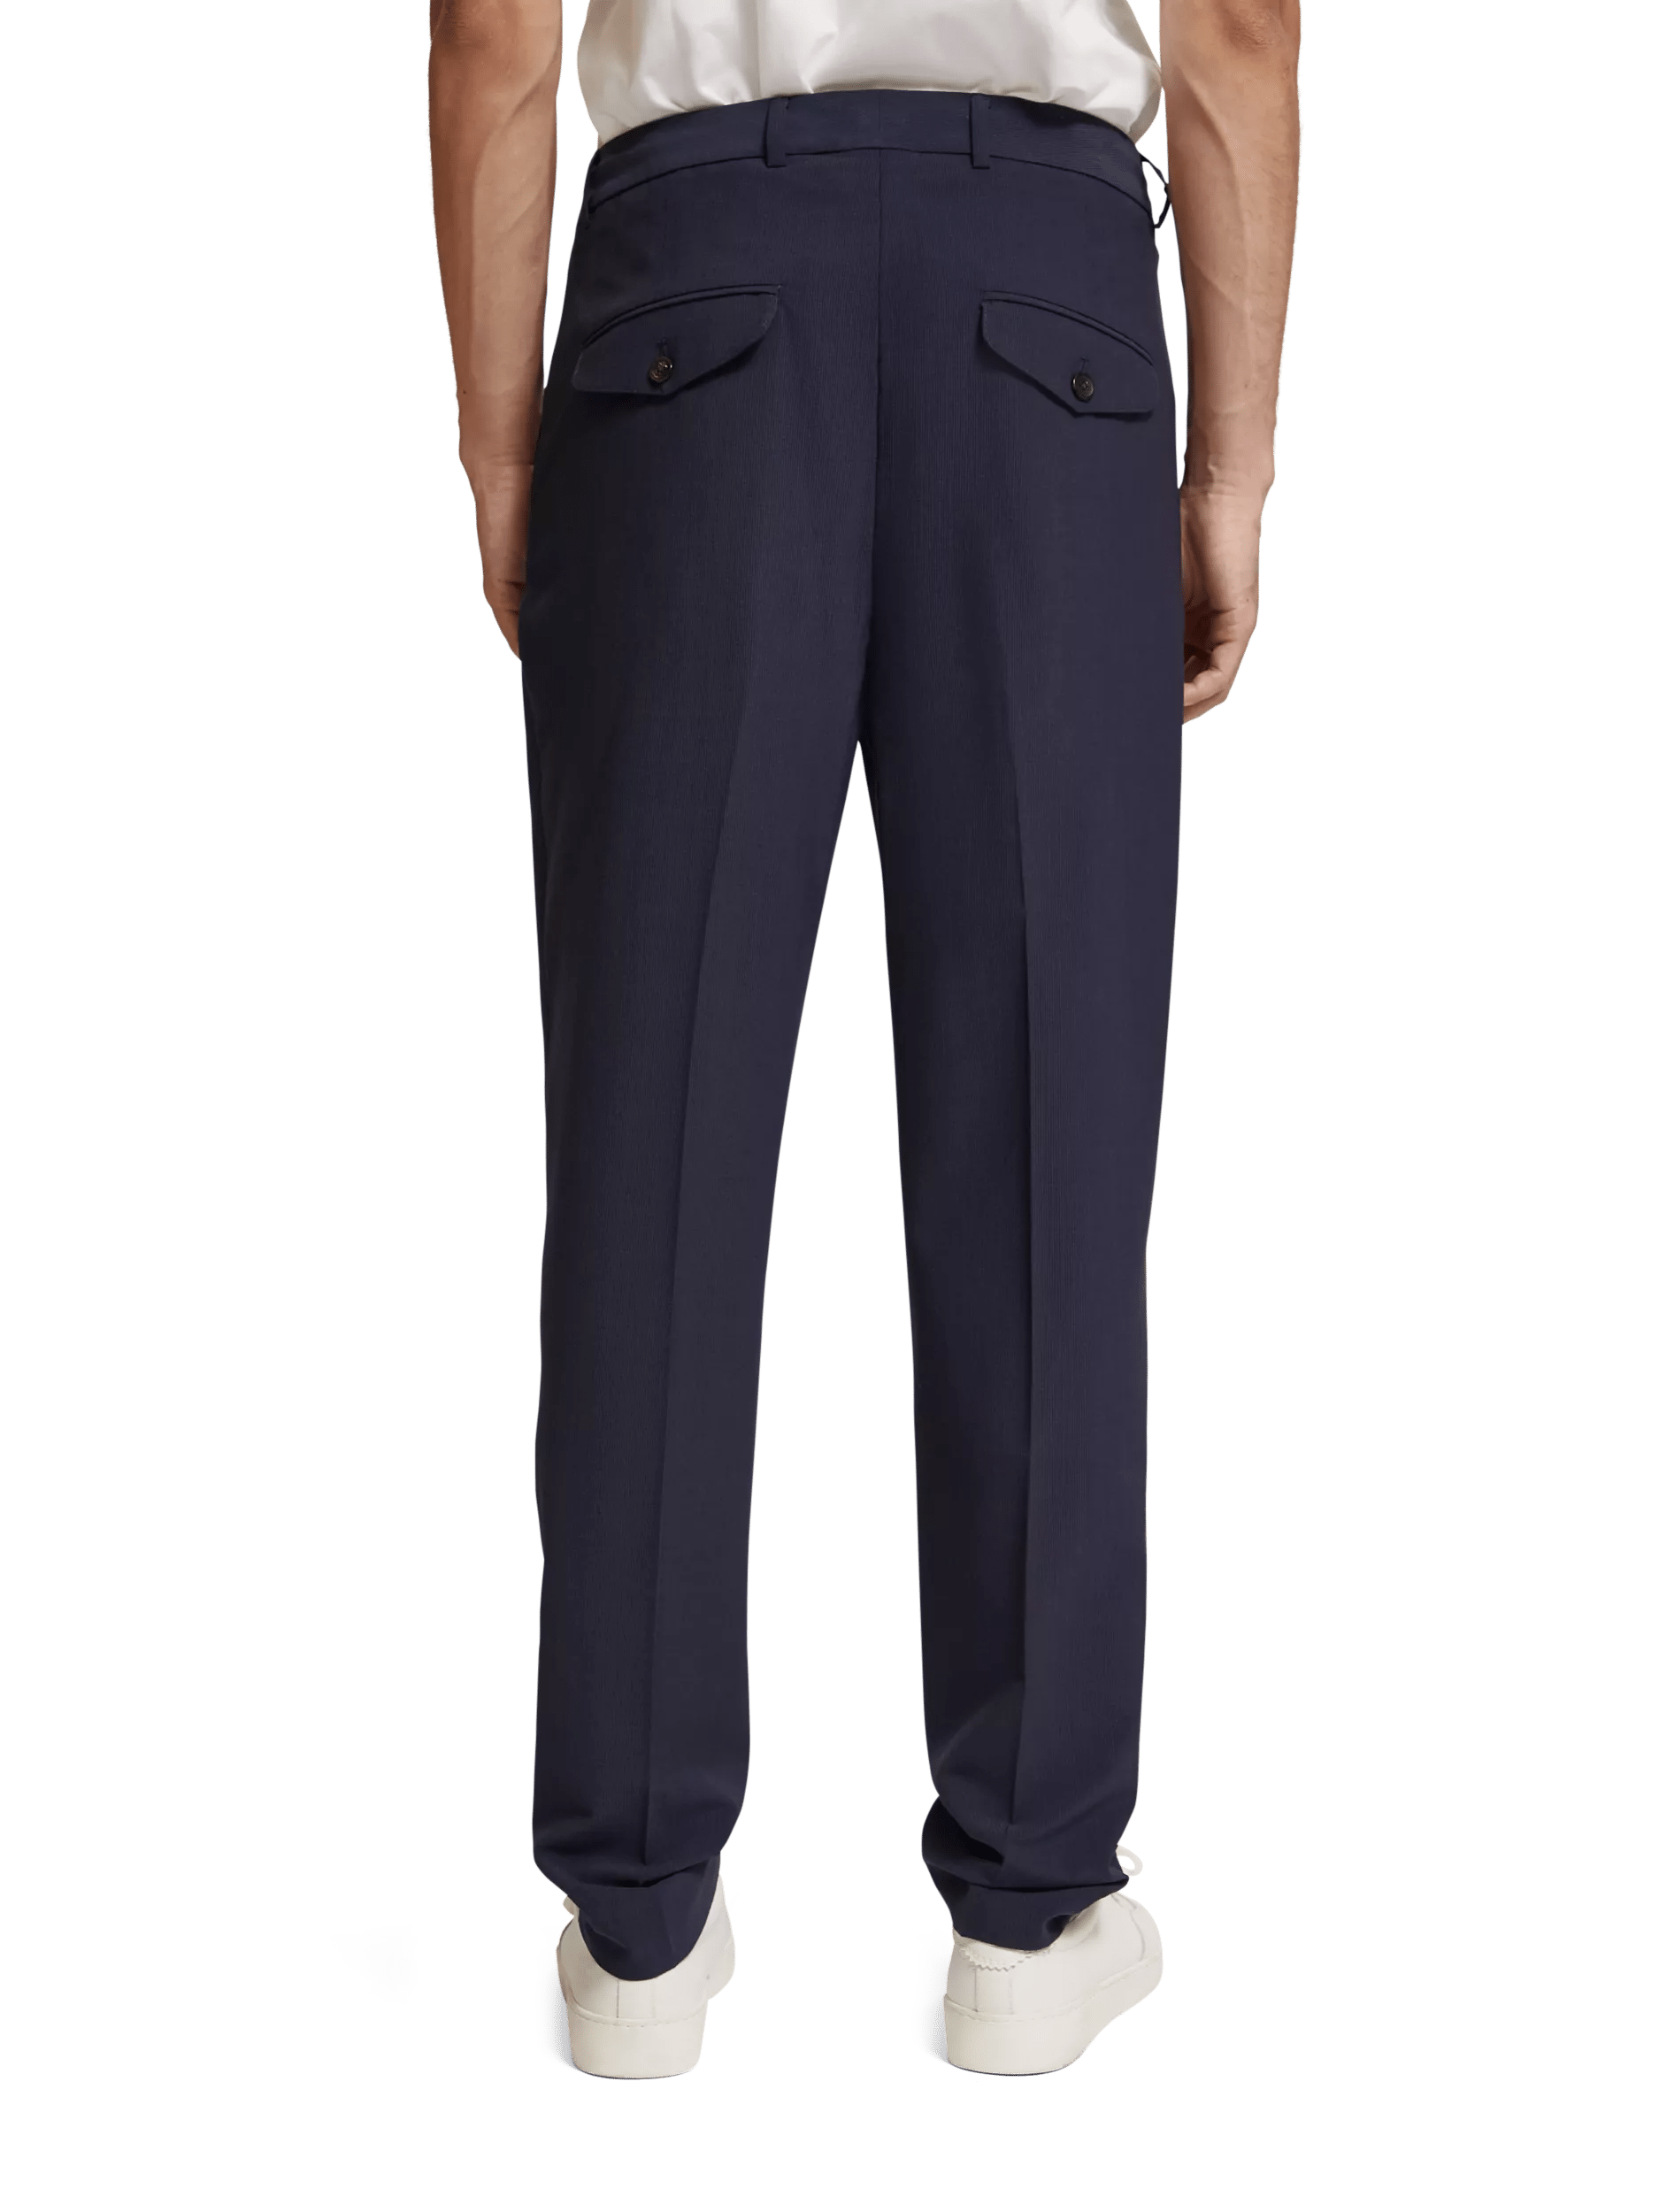 Scotch & Soda The Irving wool-blended chino FIT-BCK